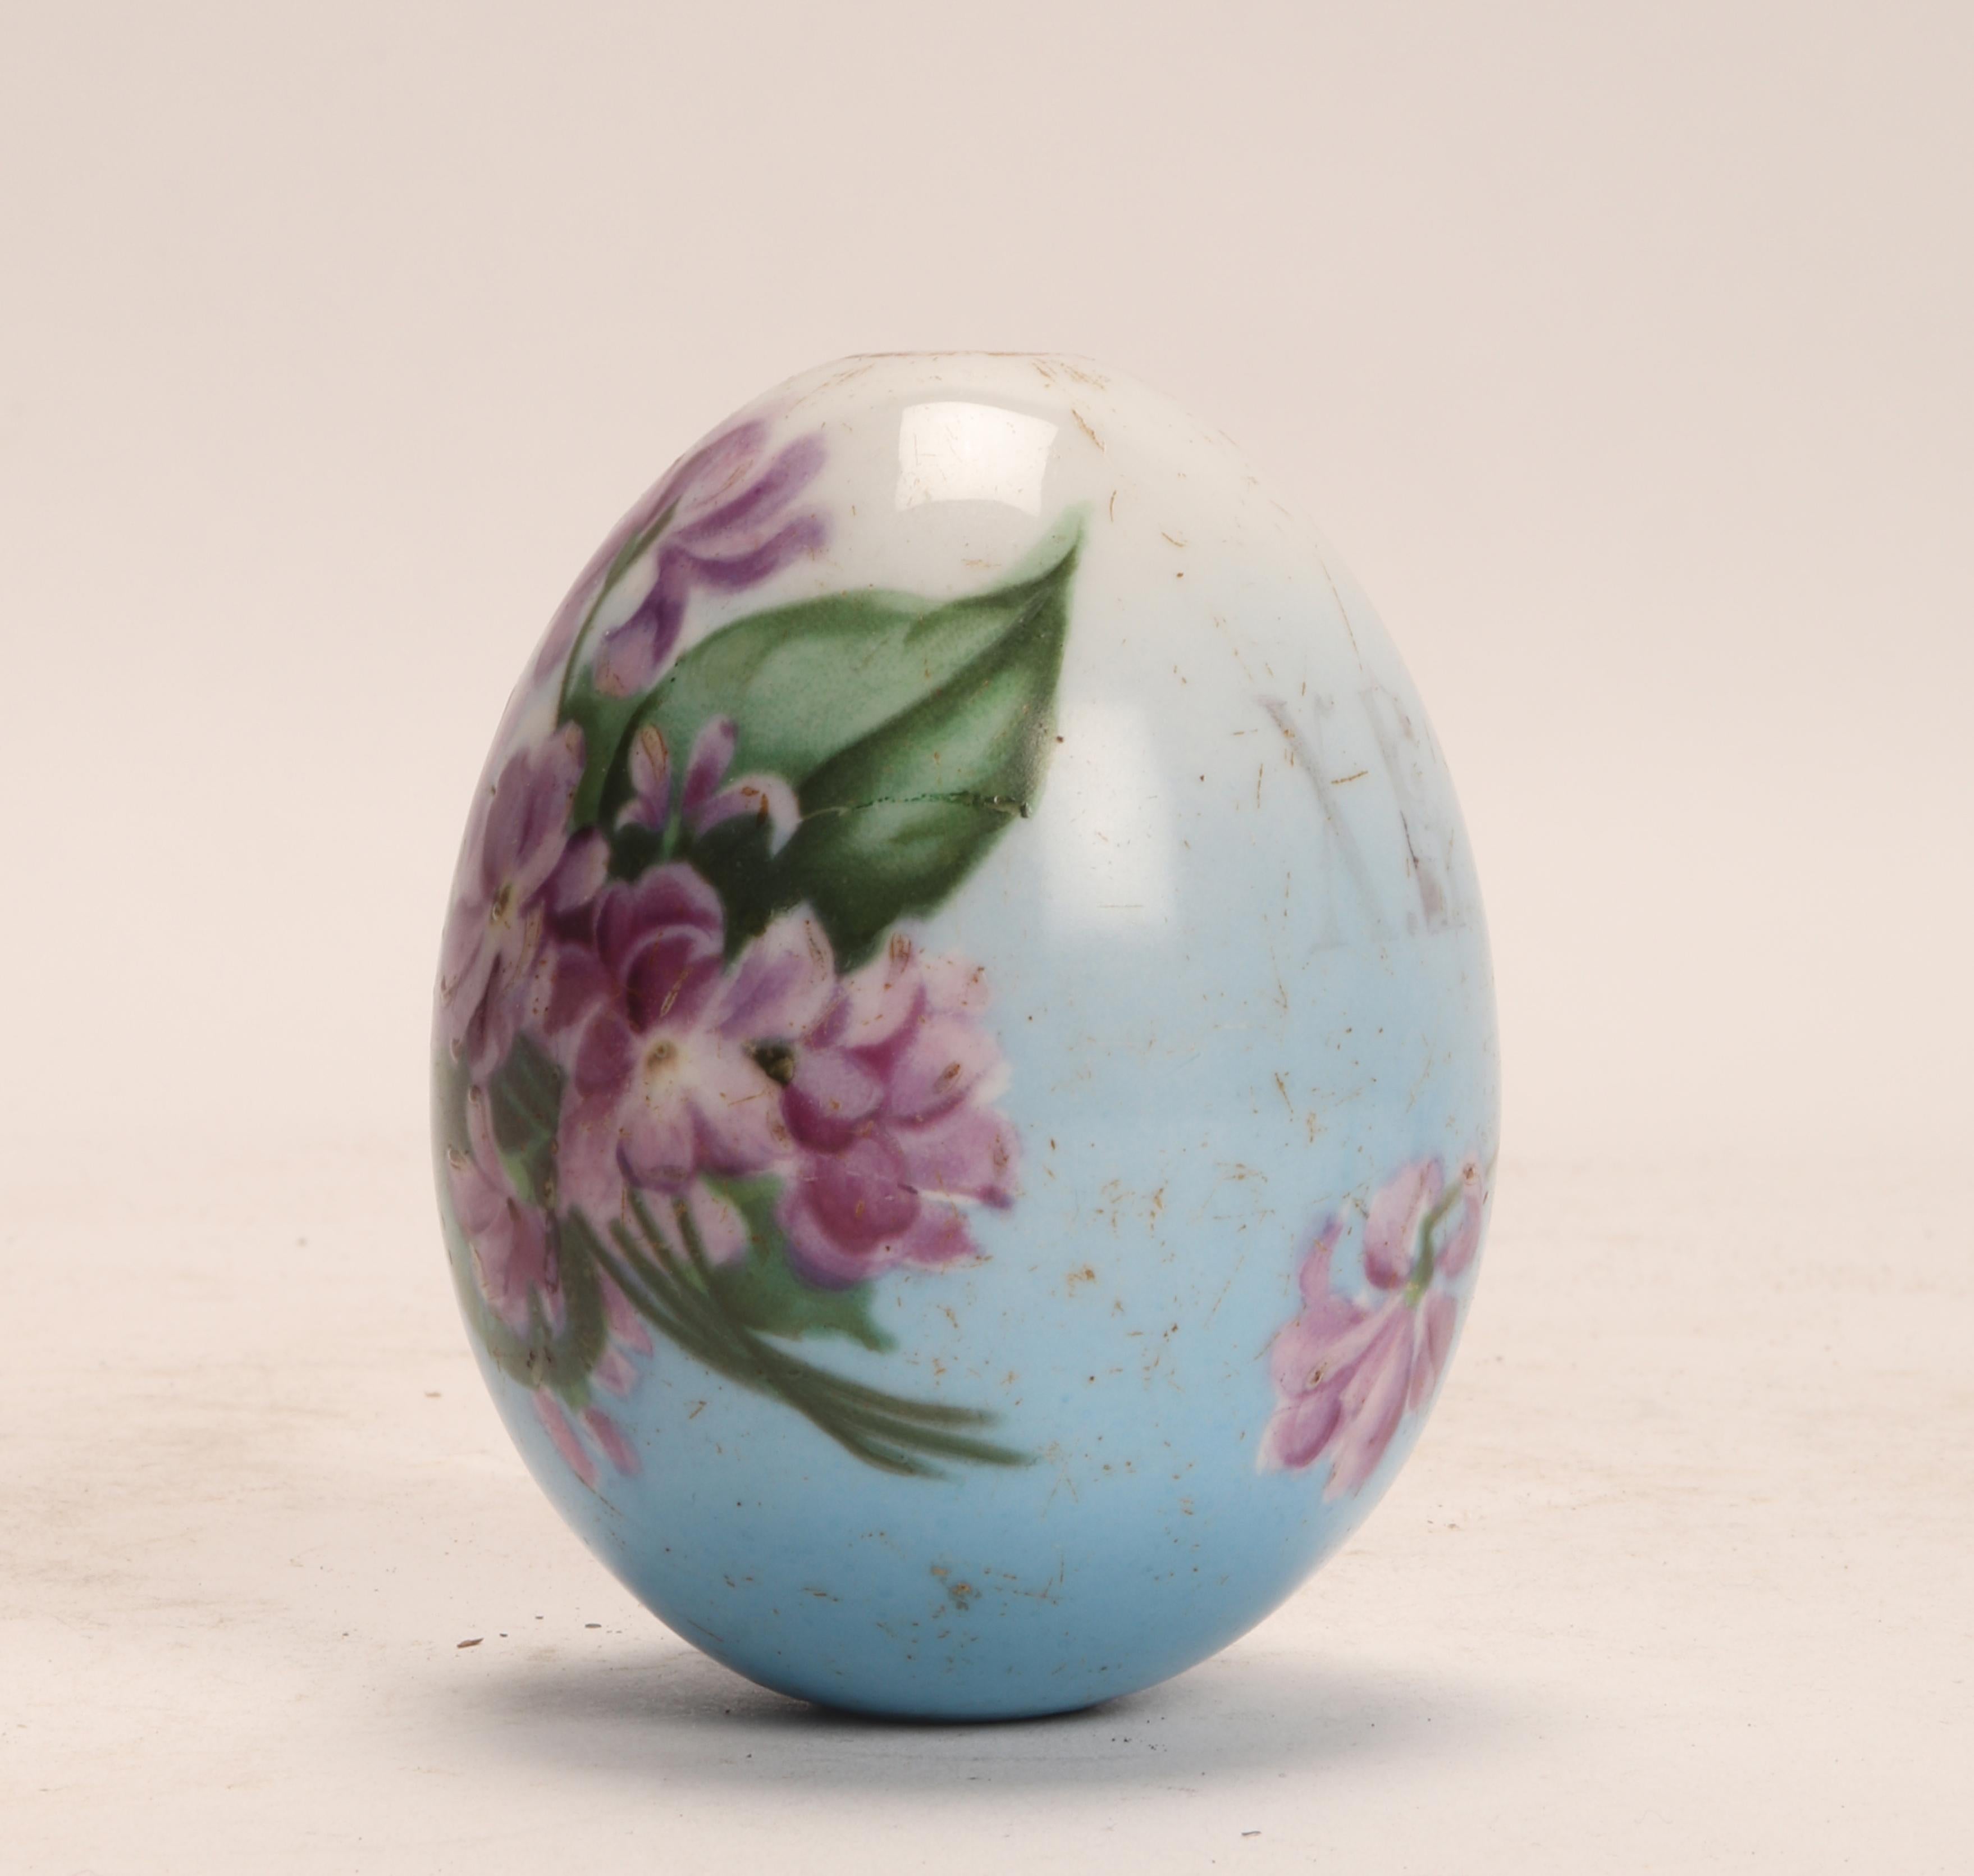 A painted porcelain Easter egg, depicting a bunch of violet flowers on one side, while on the other side the cyrillic monogram: C.R. (Risen Christ), on a blue background. Russia, circa 1890.